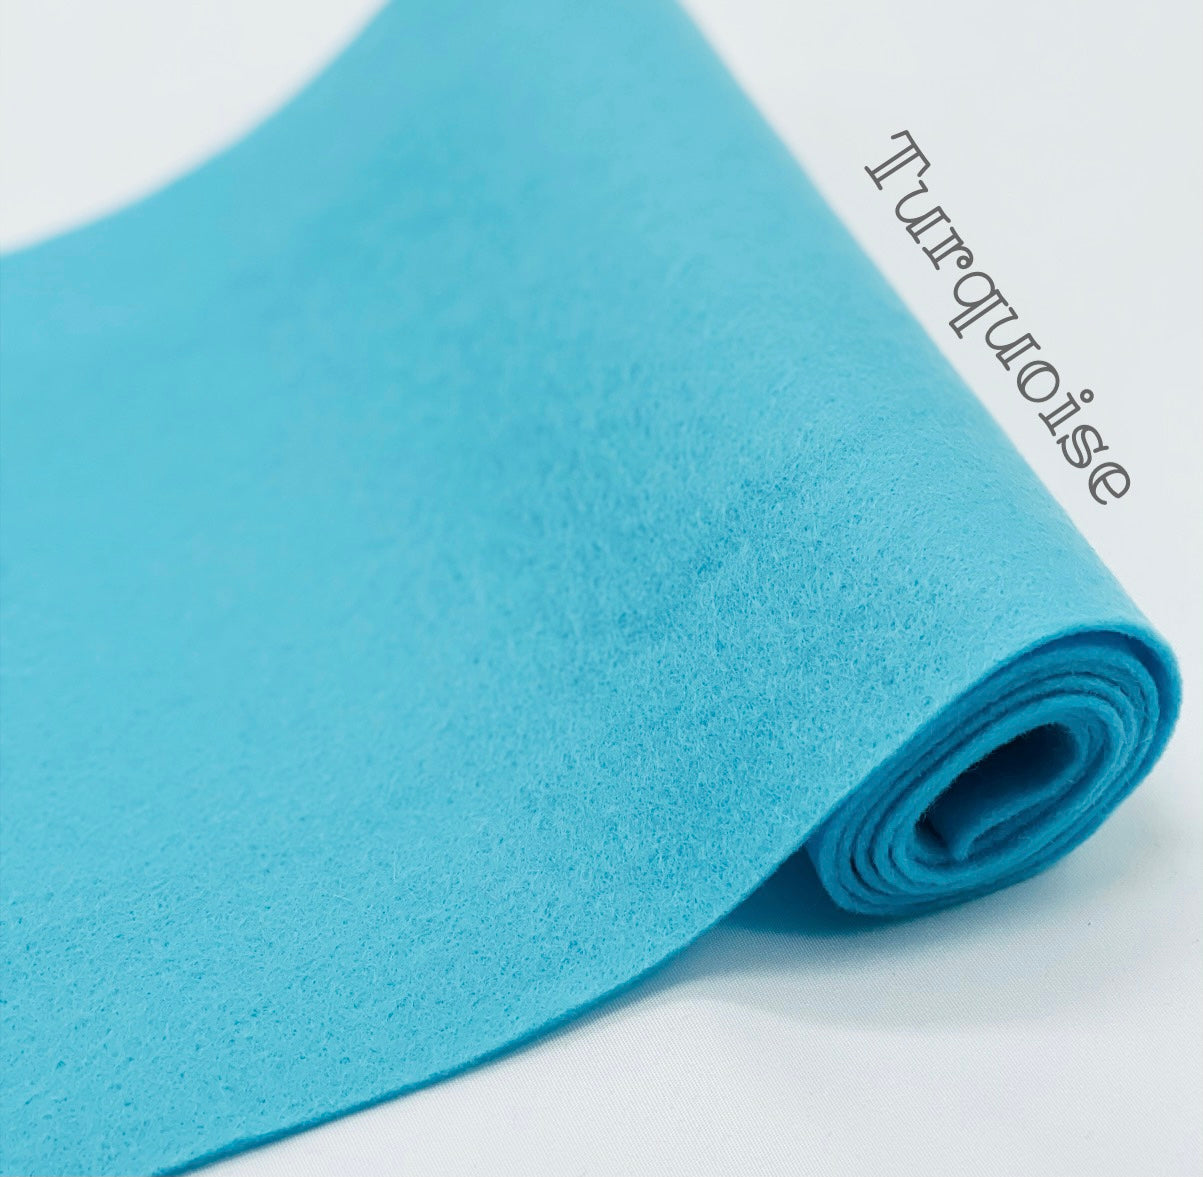 100% Wool Felt , 1.2mm thick for doll making, embroidery, sewing heirloom quality safe for children Turquoise Blue